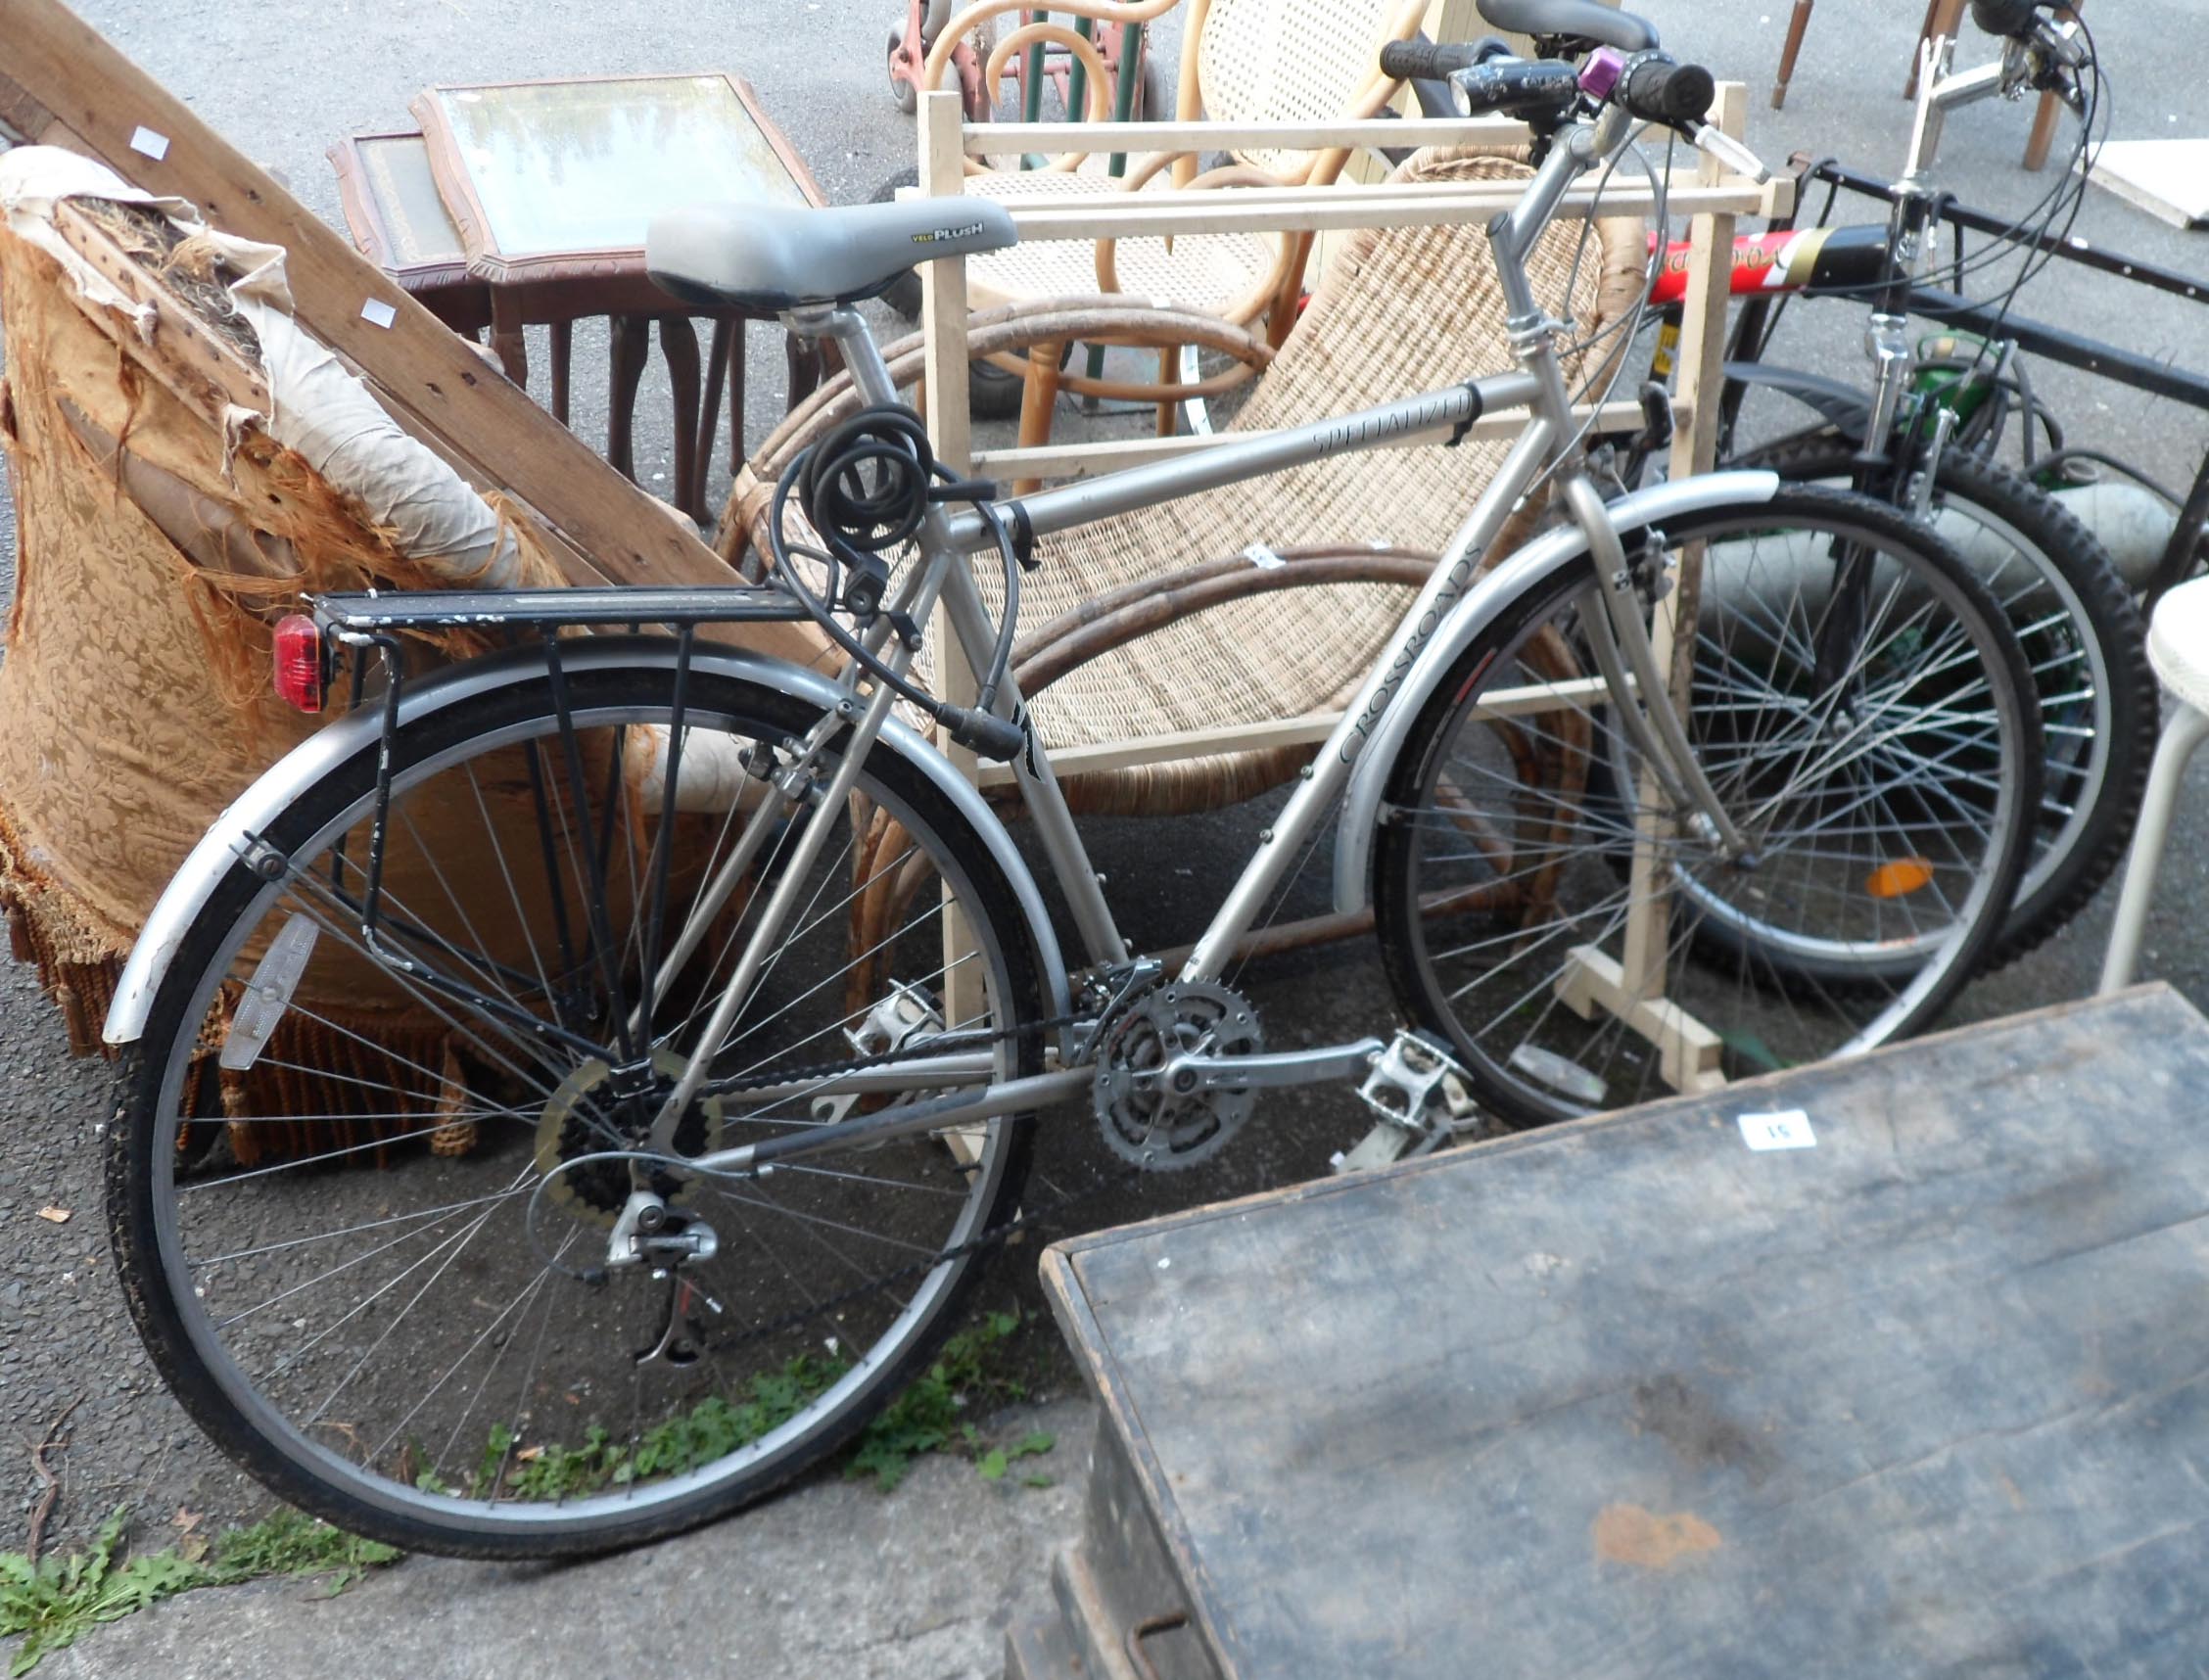 A Crossroads Specialised Elite adult bicycle